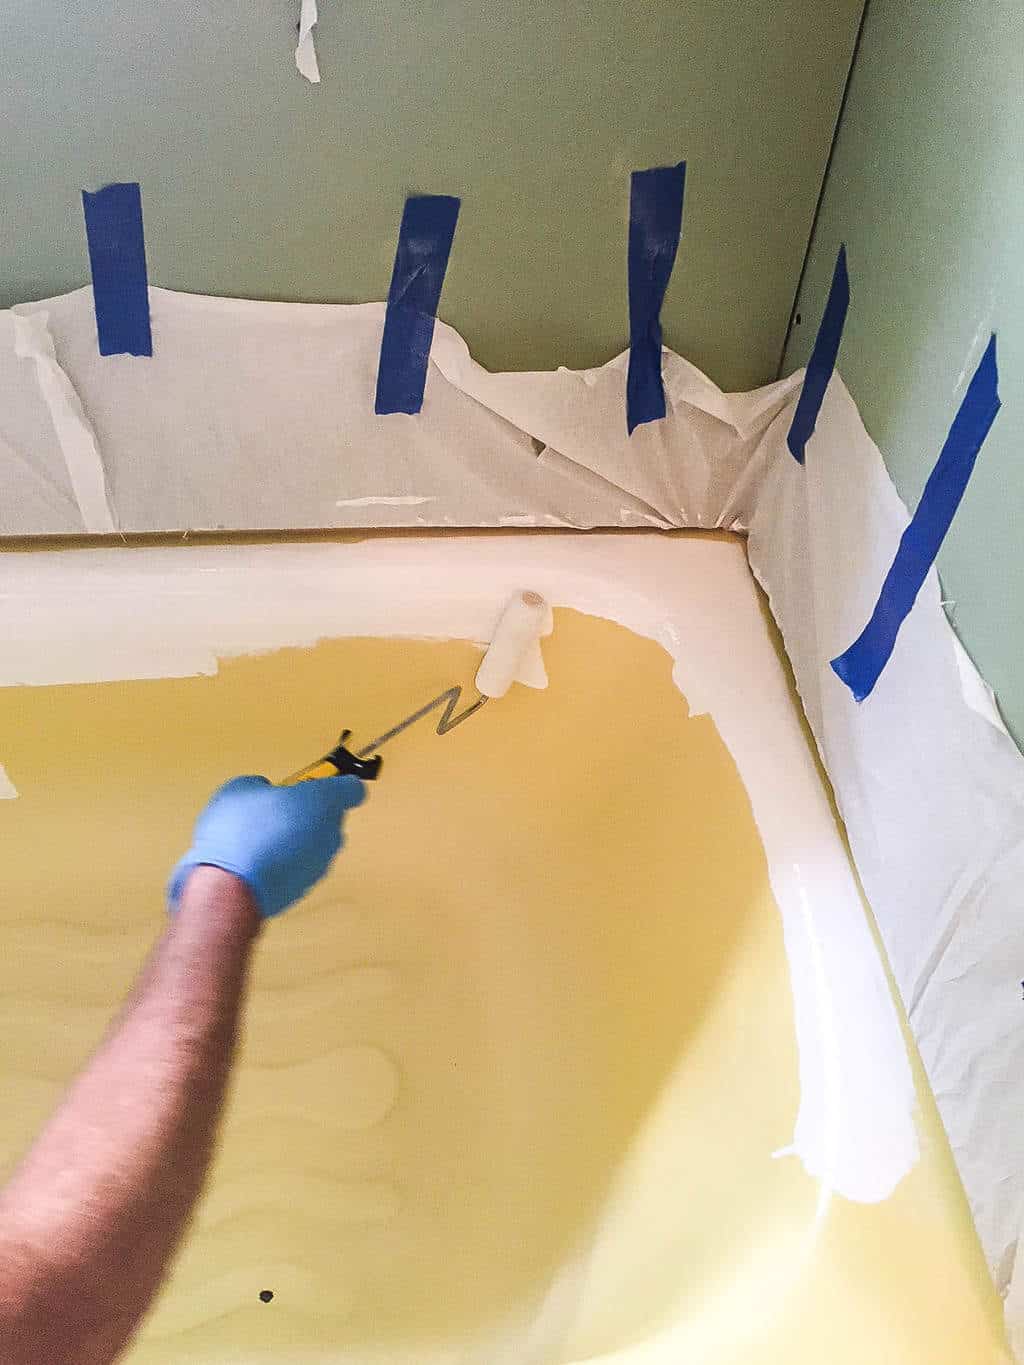 How To Paint A Bathtub Easily, What Spray Paint To Use On Bathtub